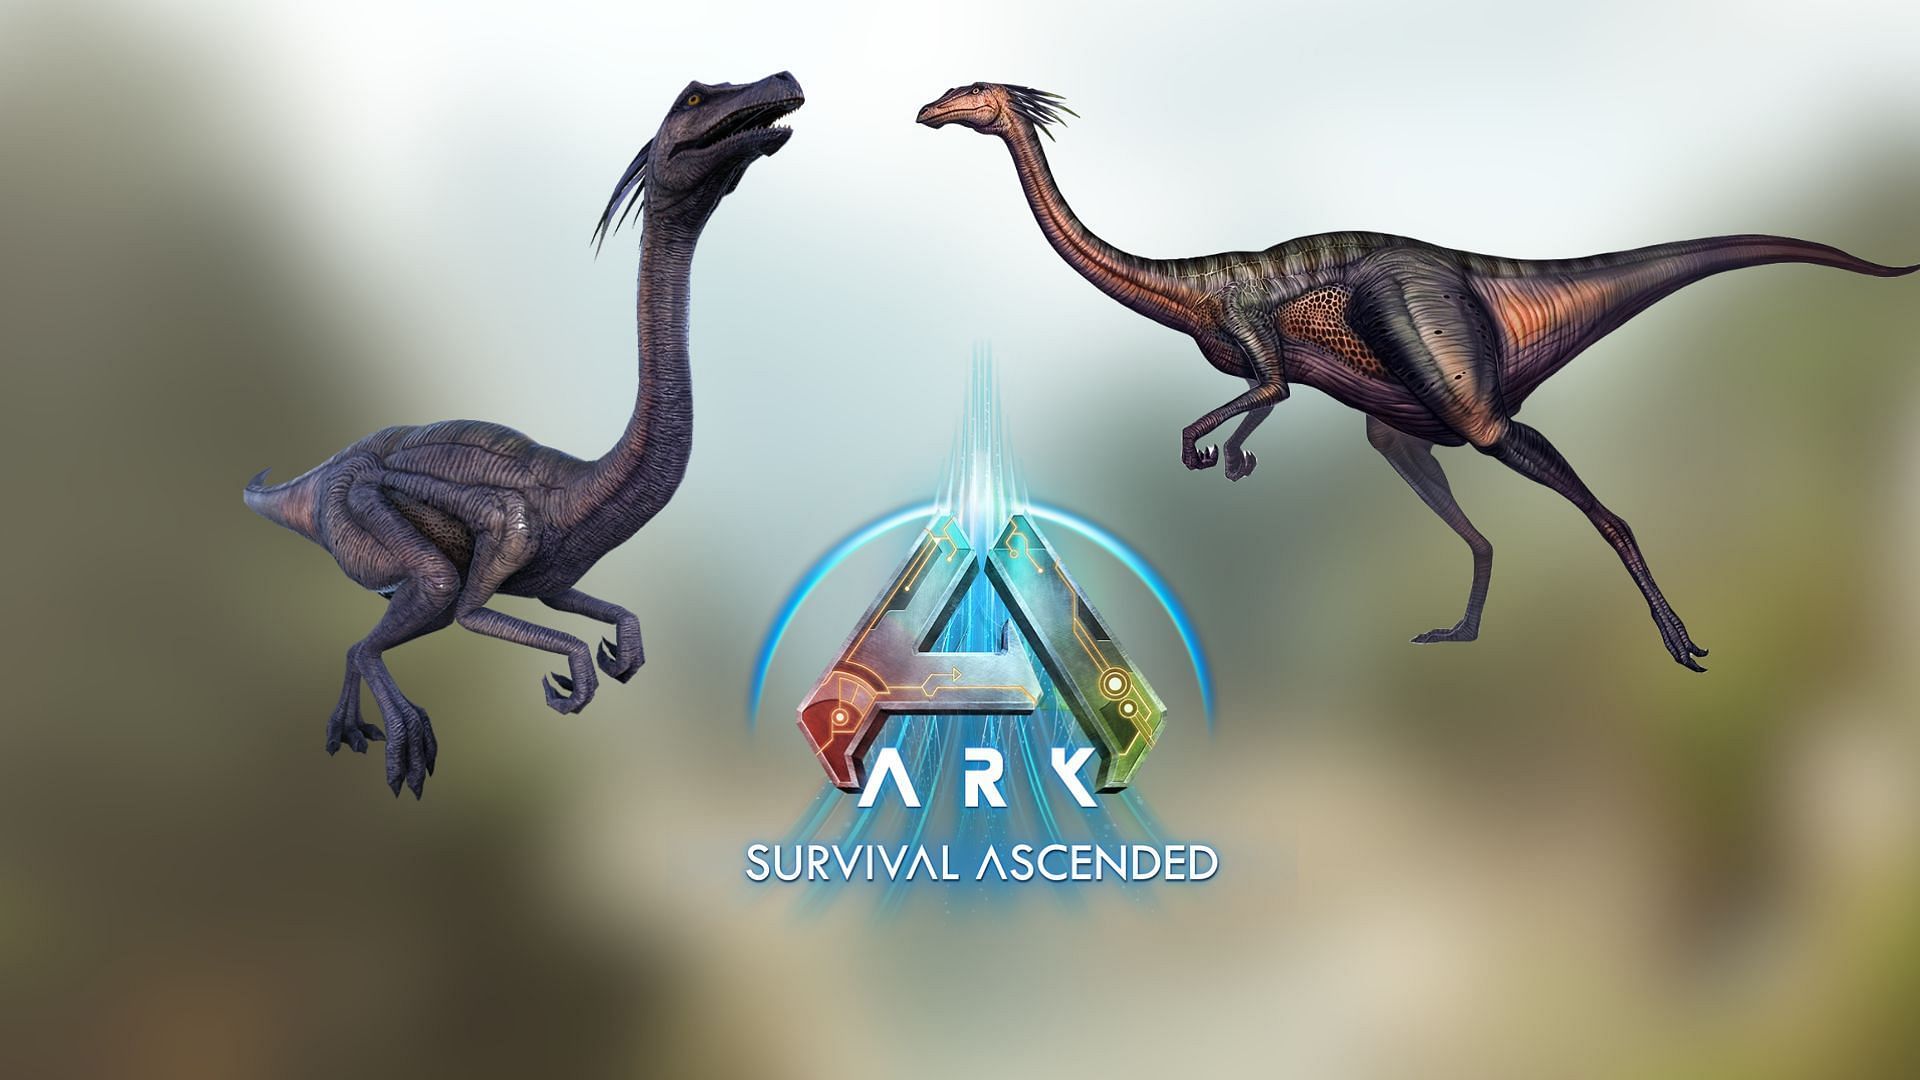 Taming Gallimimus in Ark Survival Ascended